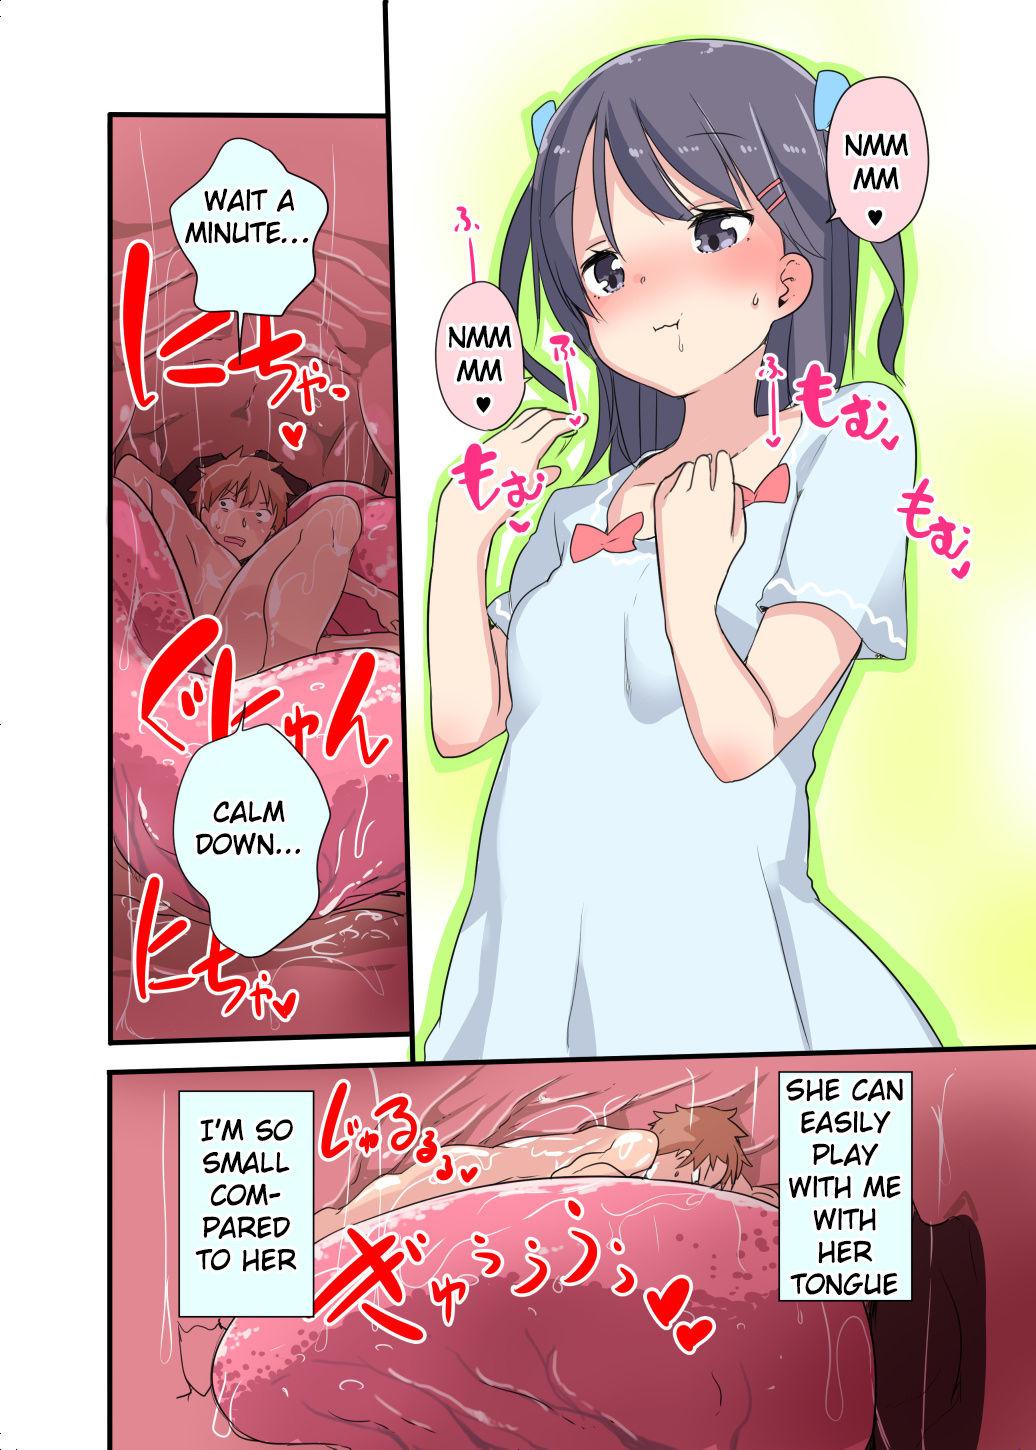 Hot Girl Eaten by her - Original 1080p - Page 3